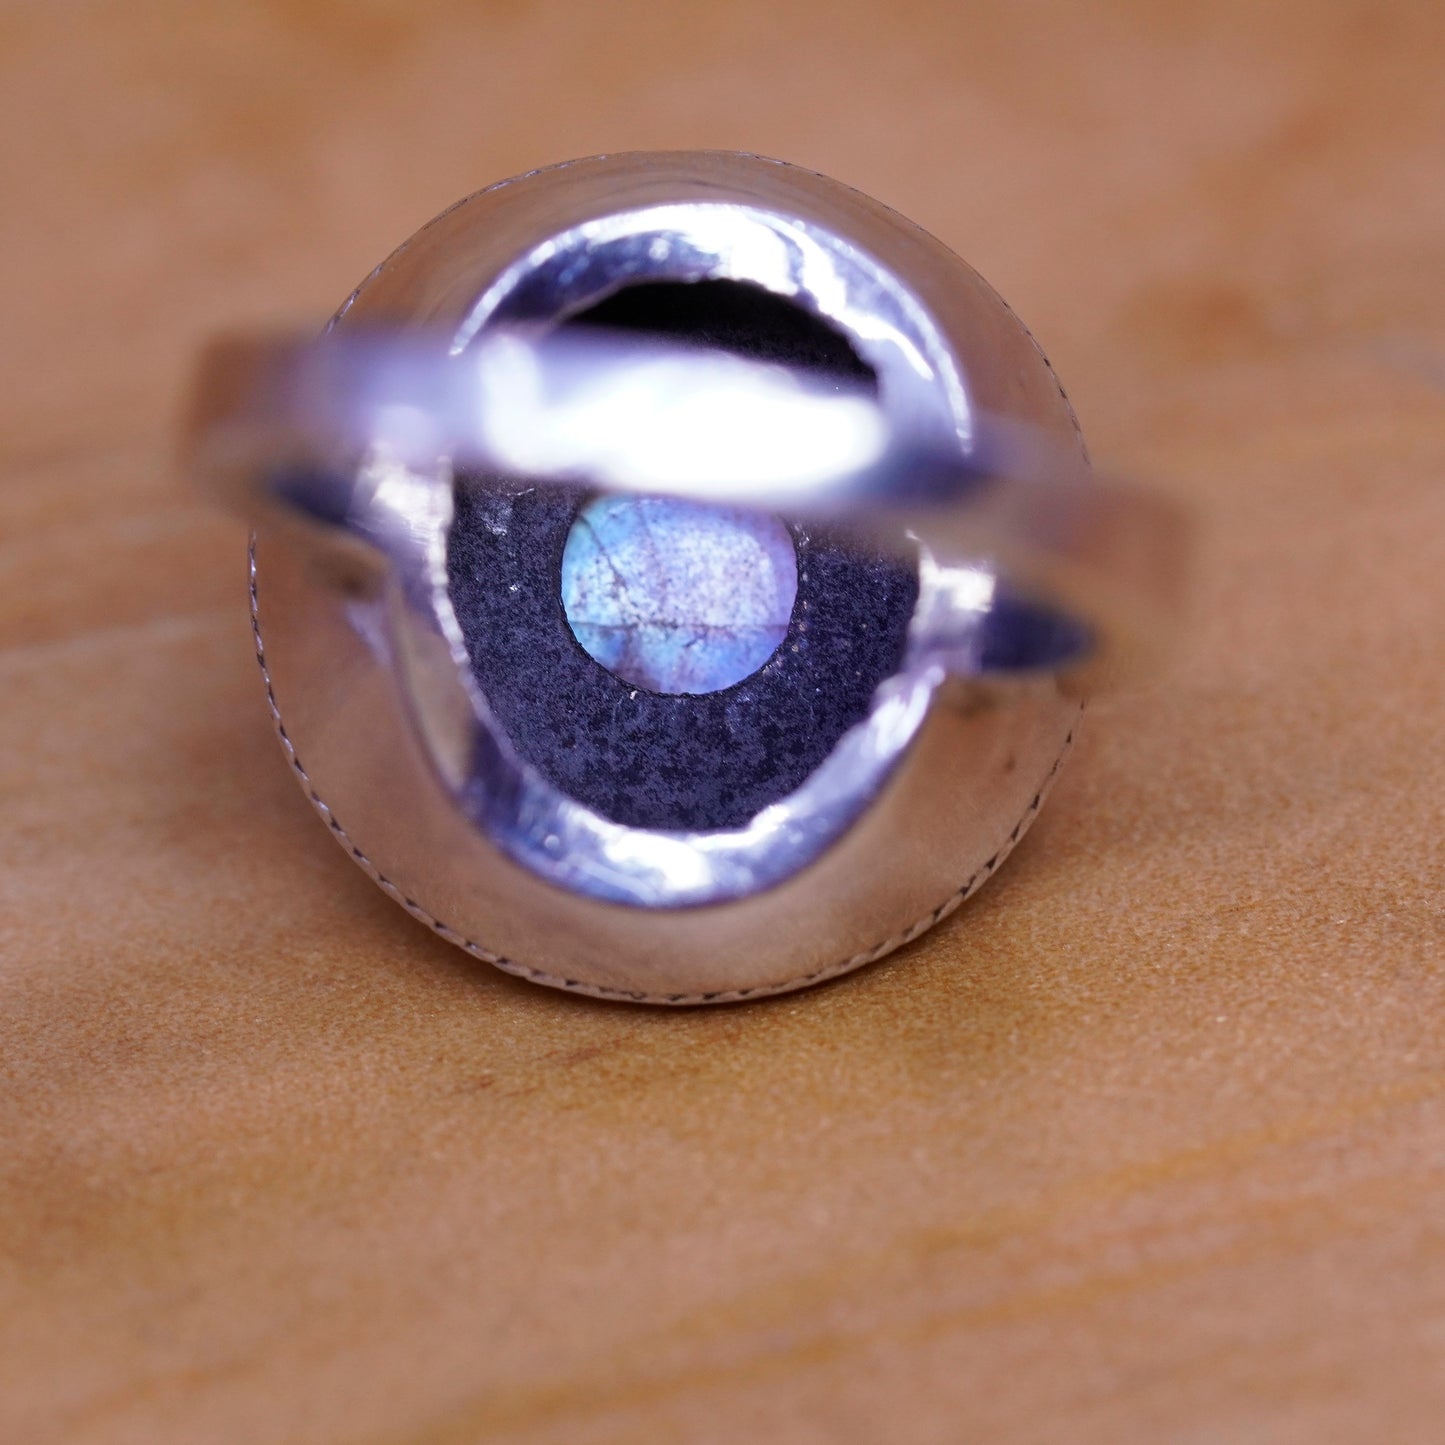 Size 6, vintage sterling 925 silver handmade ring with moonstone beads around